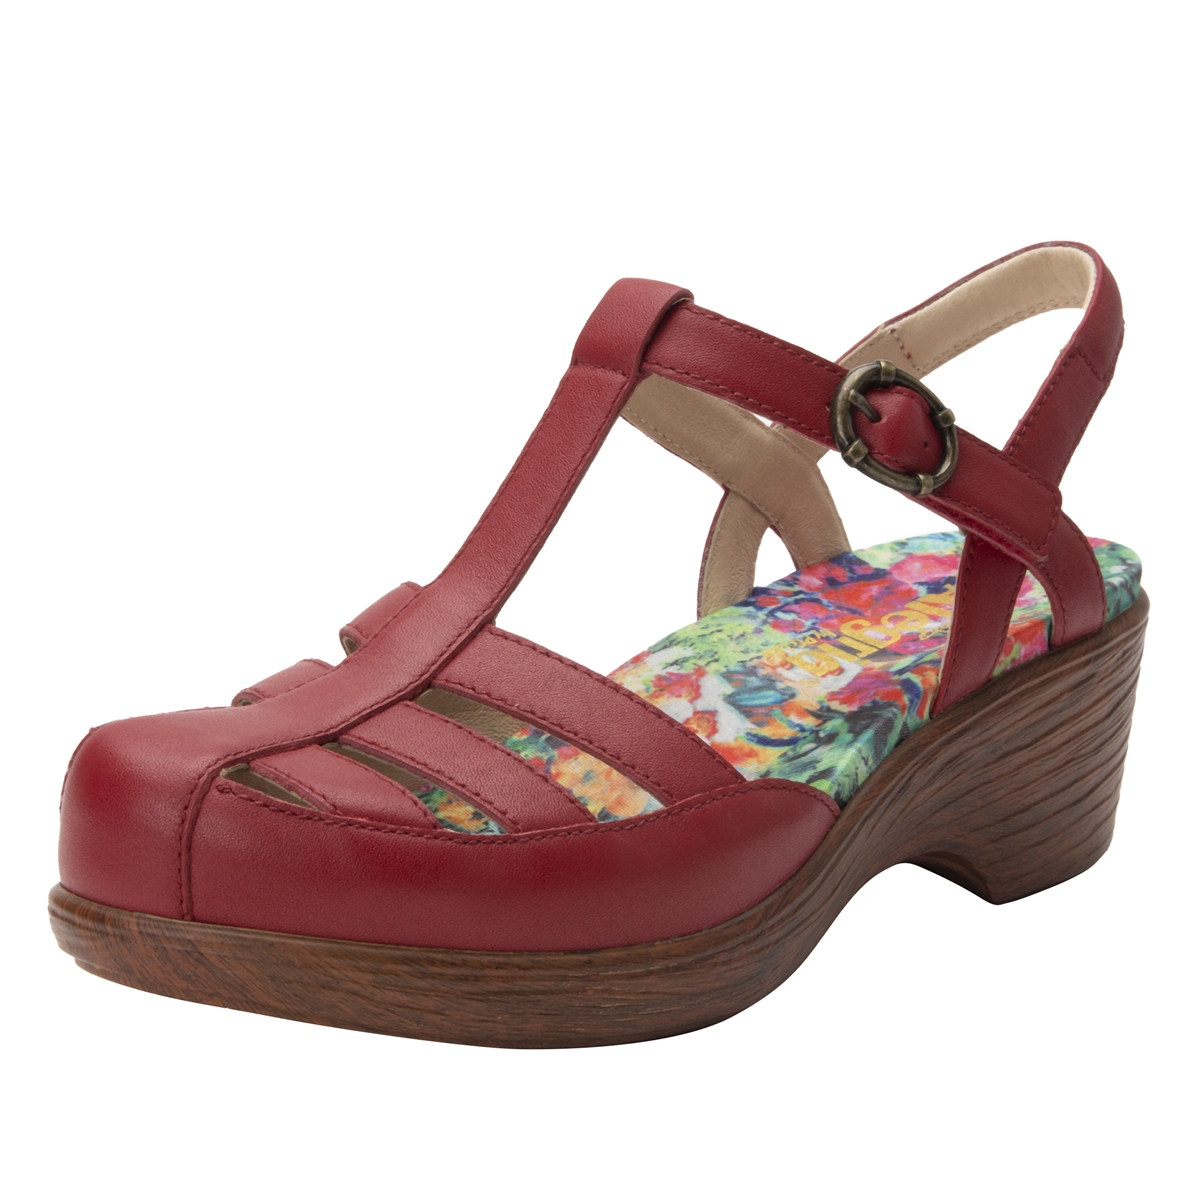 Alegria Shoes - Summer Red